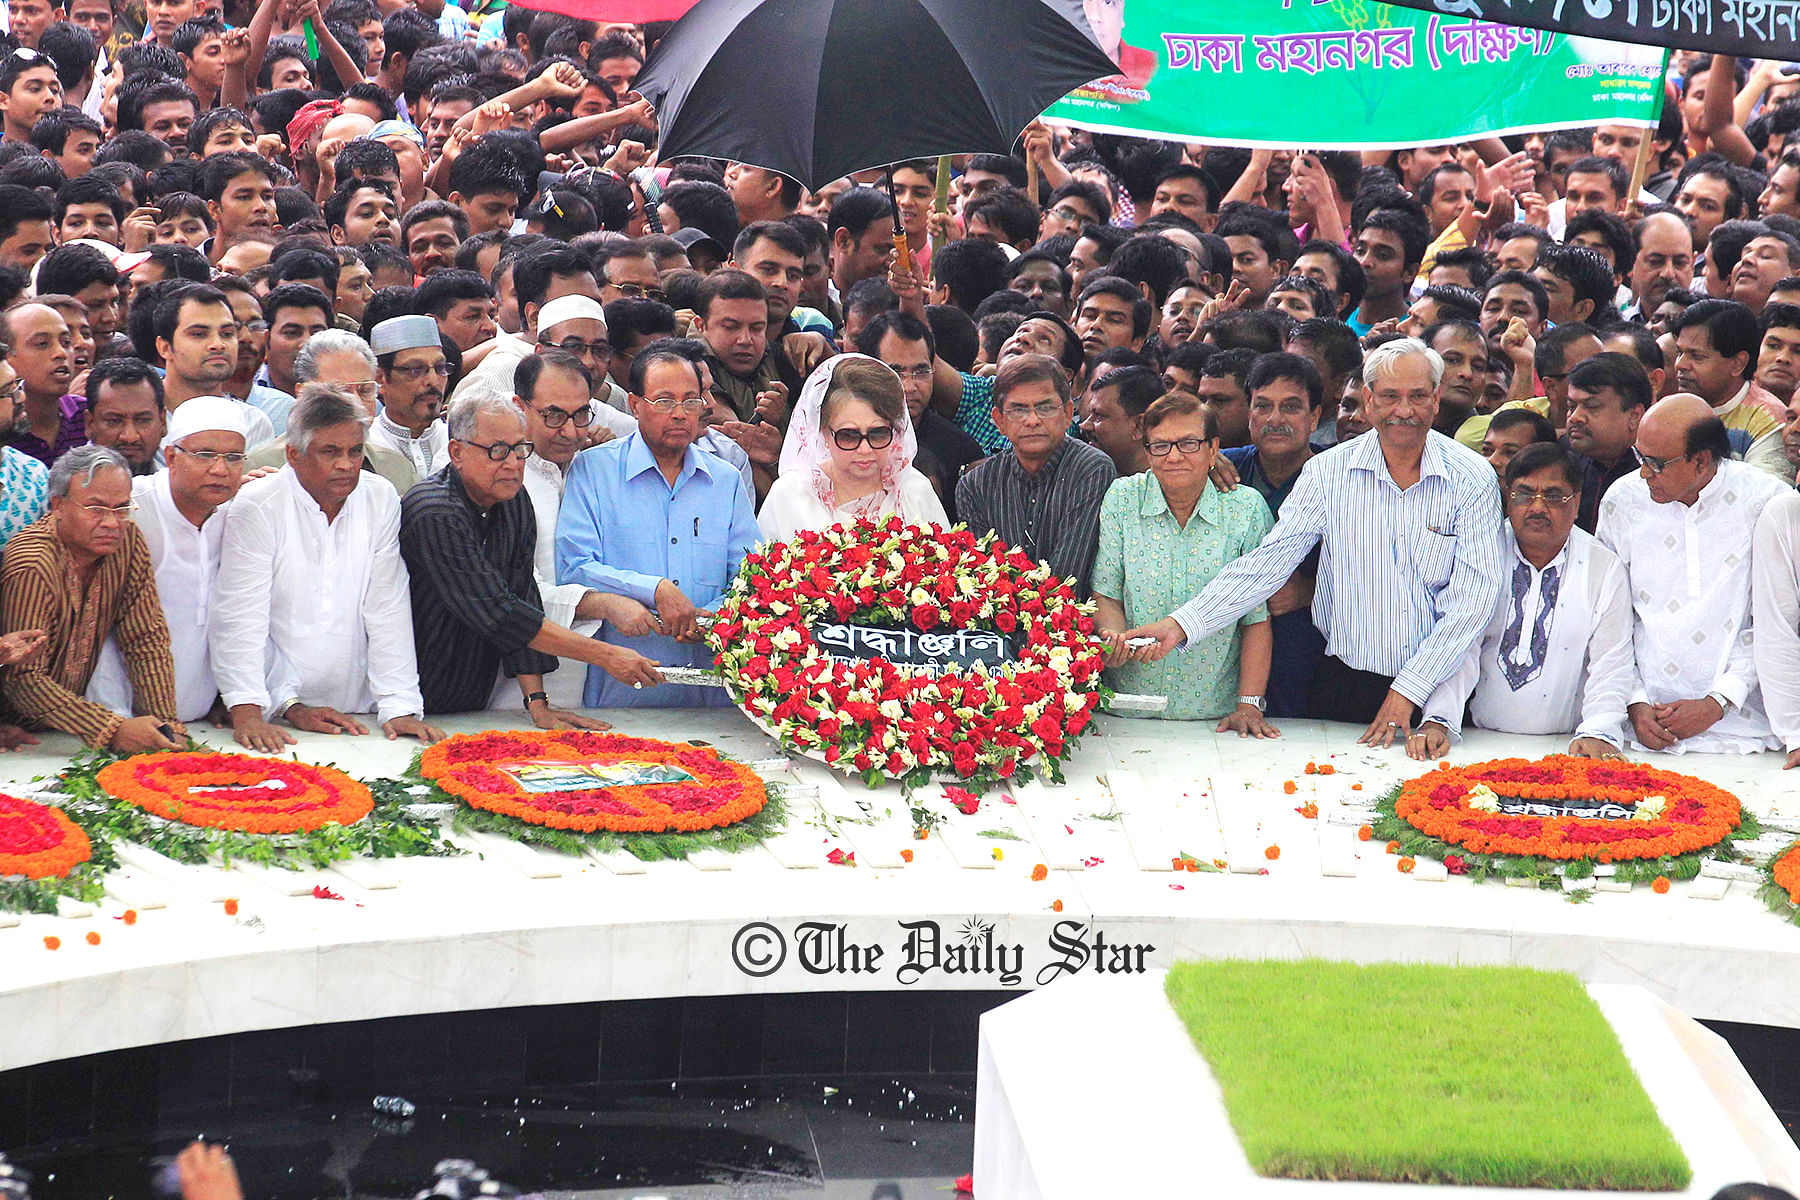 BNP Chairperson Khaleda Zia places a wreath at the grave of the party founder Ziaur Rahman marking his 33rd death anniversary at Sher-e-Bangla Nagar in the capital on Friday. Photo: Firoz Ahmed